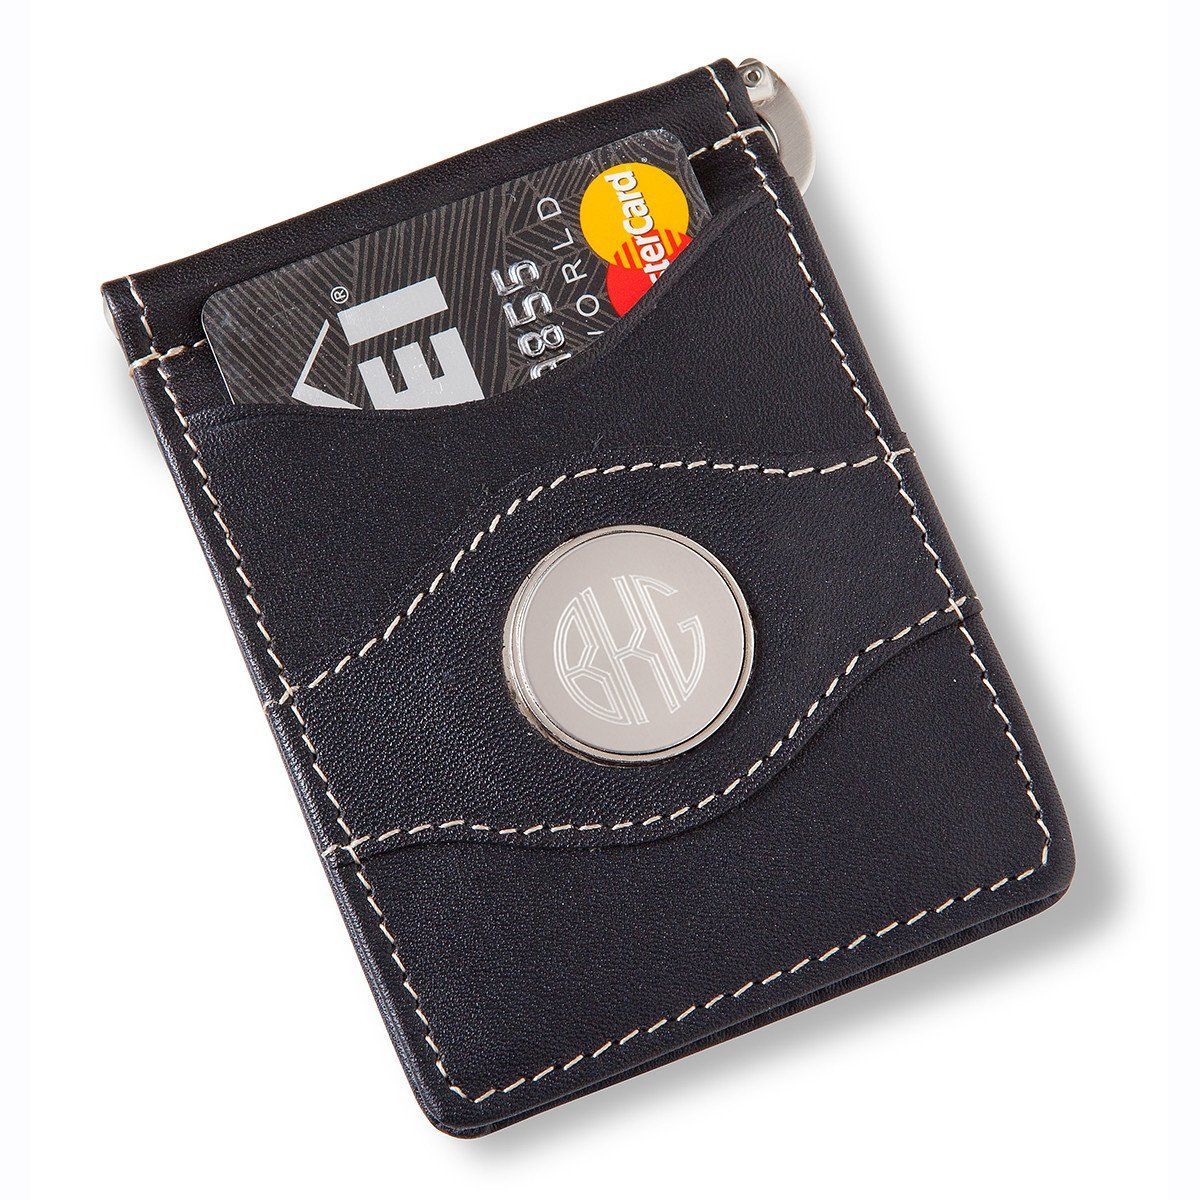 Personalized Money Clip - Wallet - Metal Pin - Executive Gifts